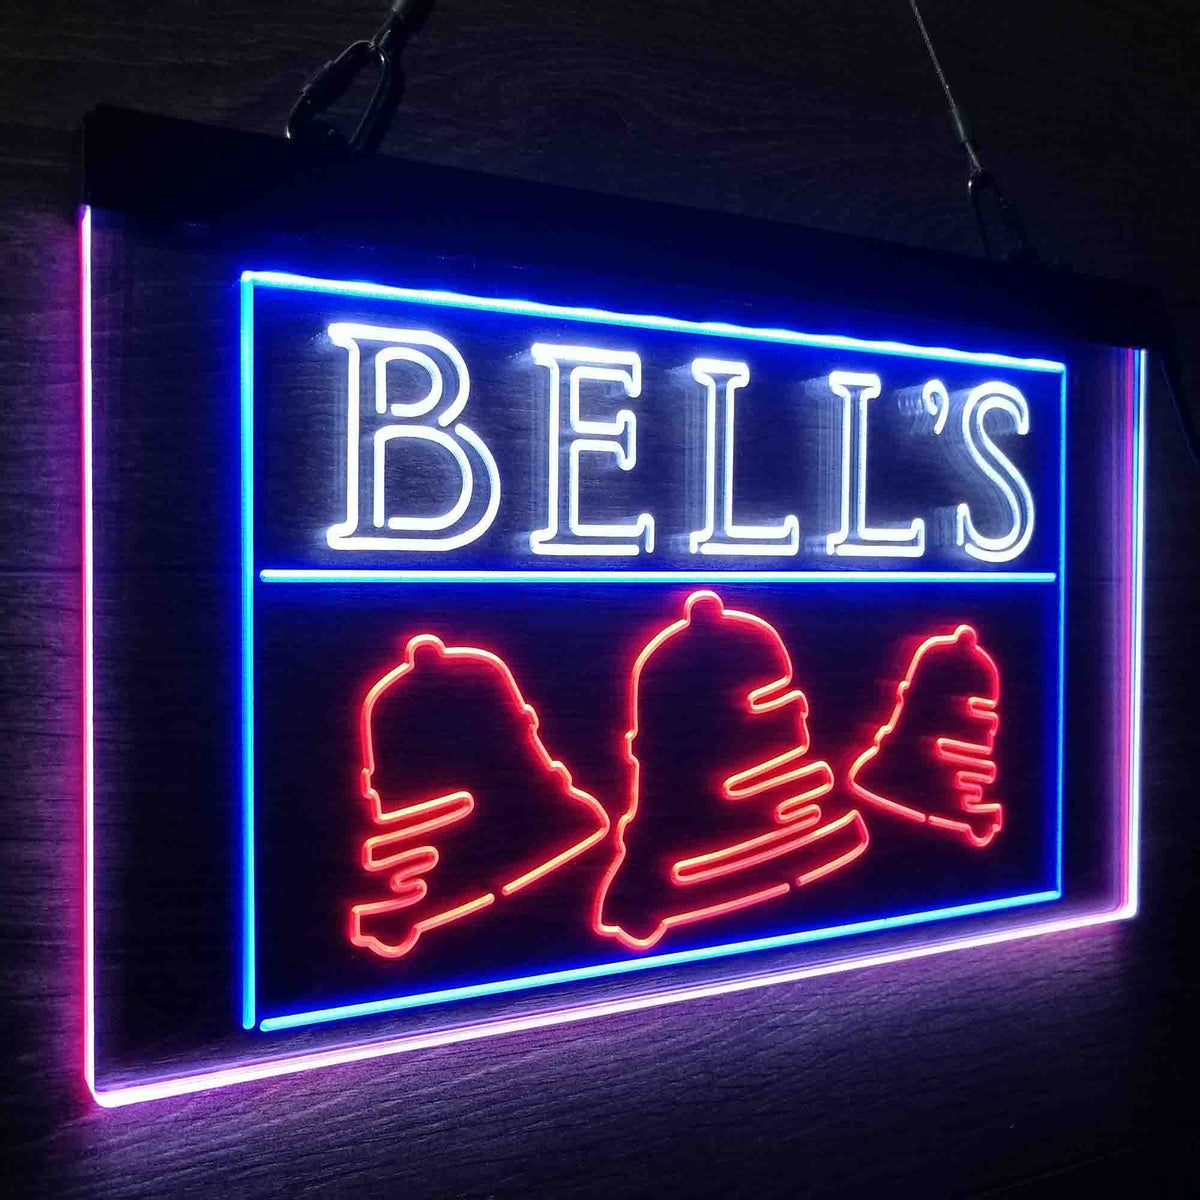 Bell's Brewery Co. Led New Sign | LED LAB CAVE